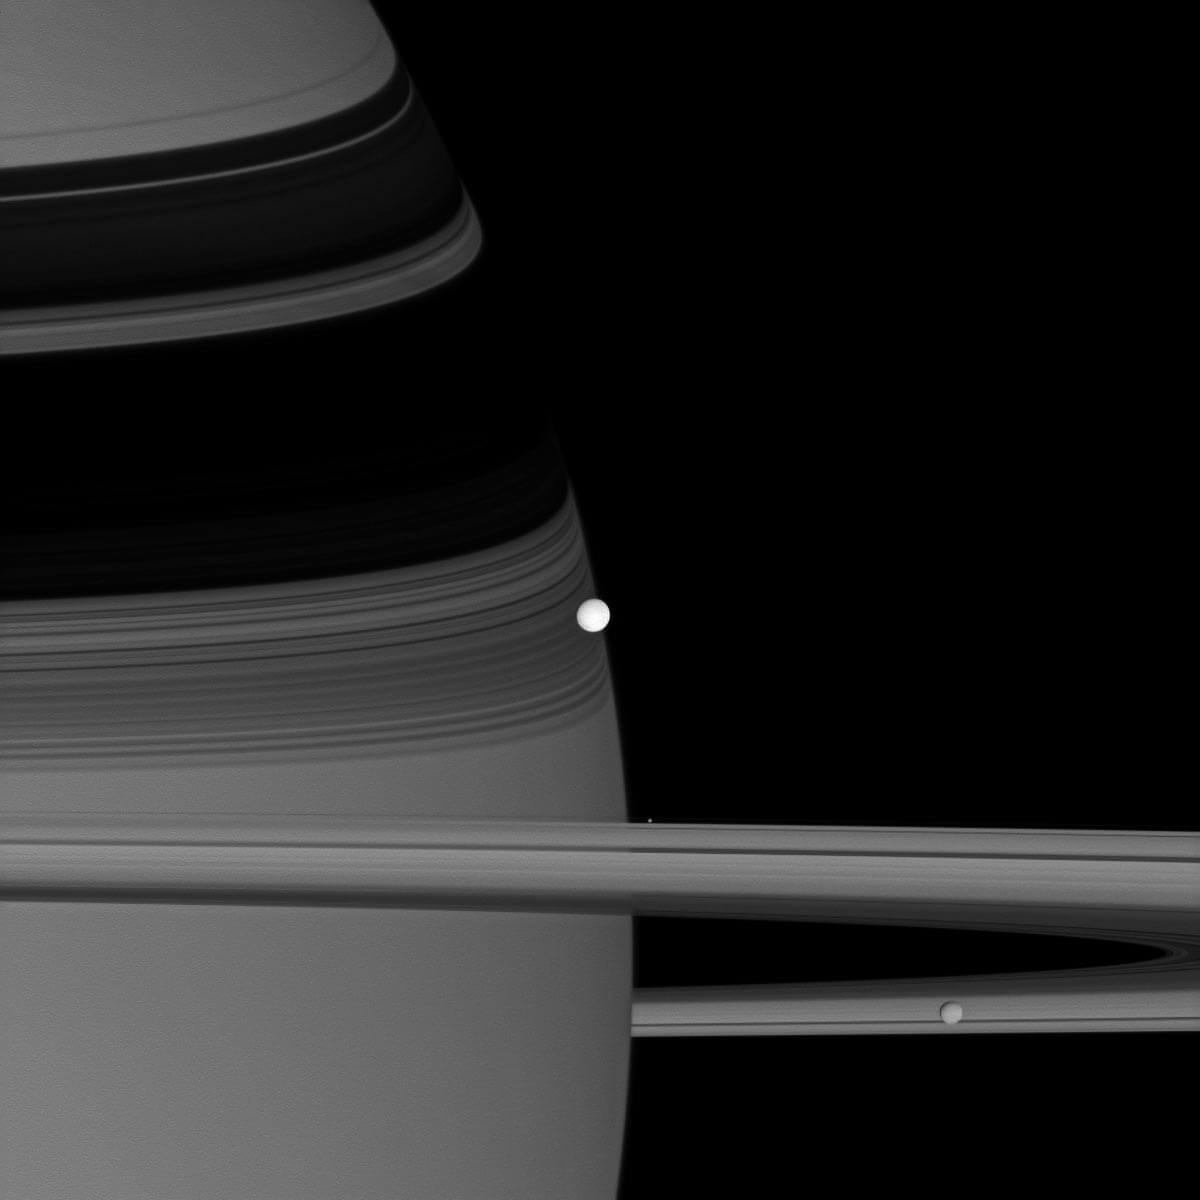 NASA's Cassini spacecraft captured this image of reflective Enceladus, seen in the center, as it orbits Saturn. Two other moons also appear in this image: Pandora, a bright blob hovering near the rings, and Mims, lower right.